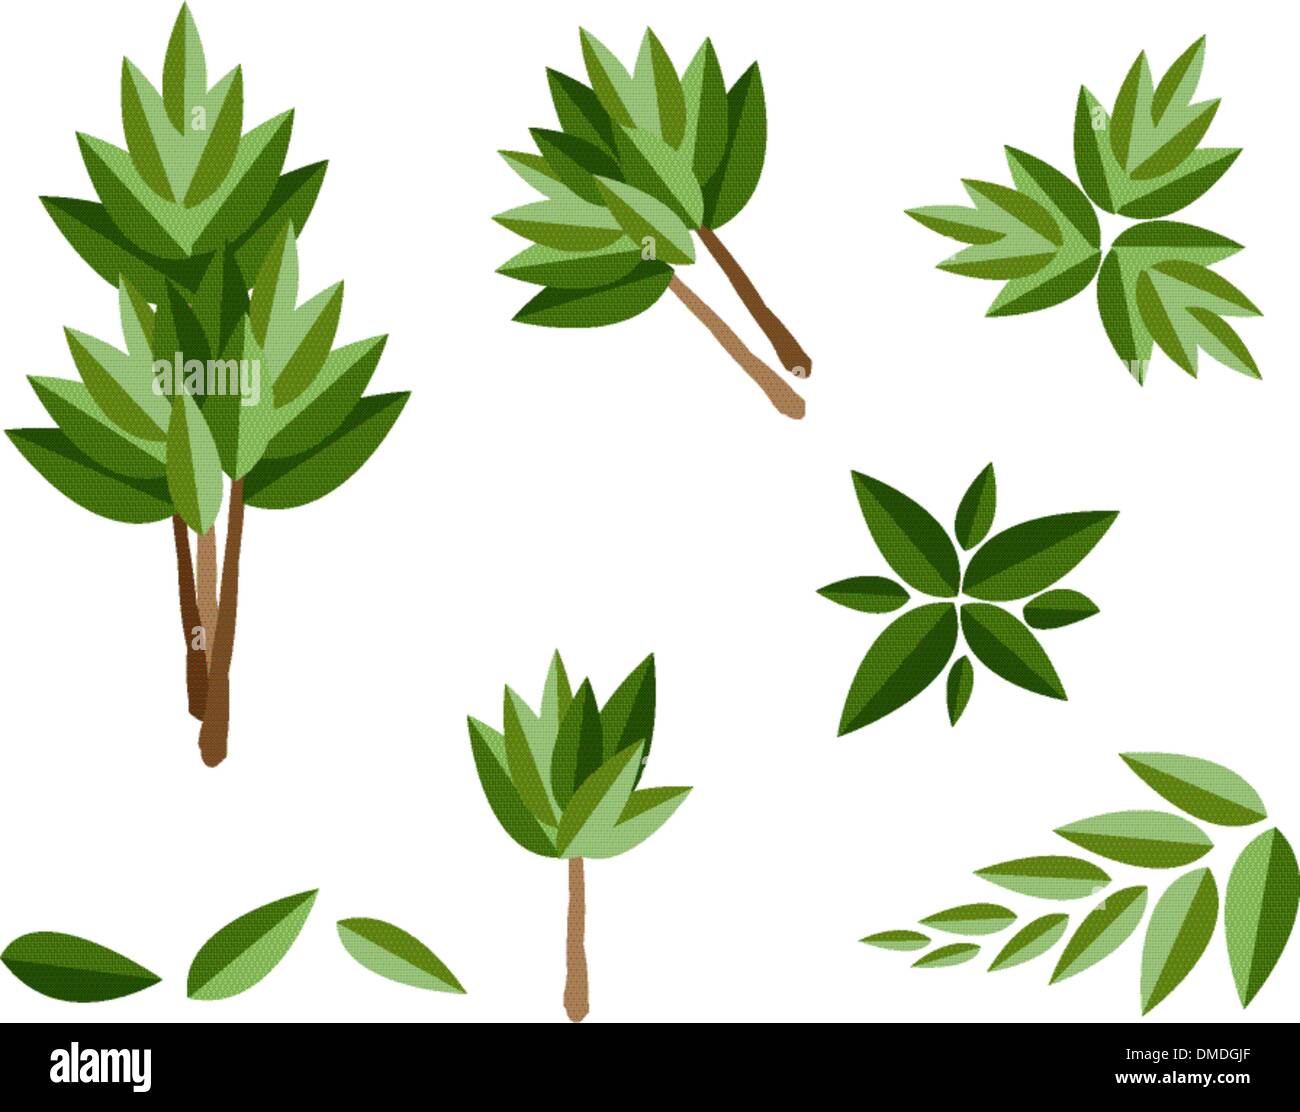 A Set of Isometric Evergreen Trees and Plants Stock Vector